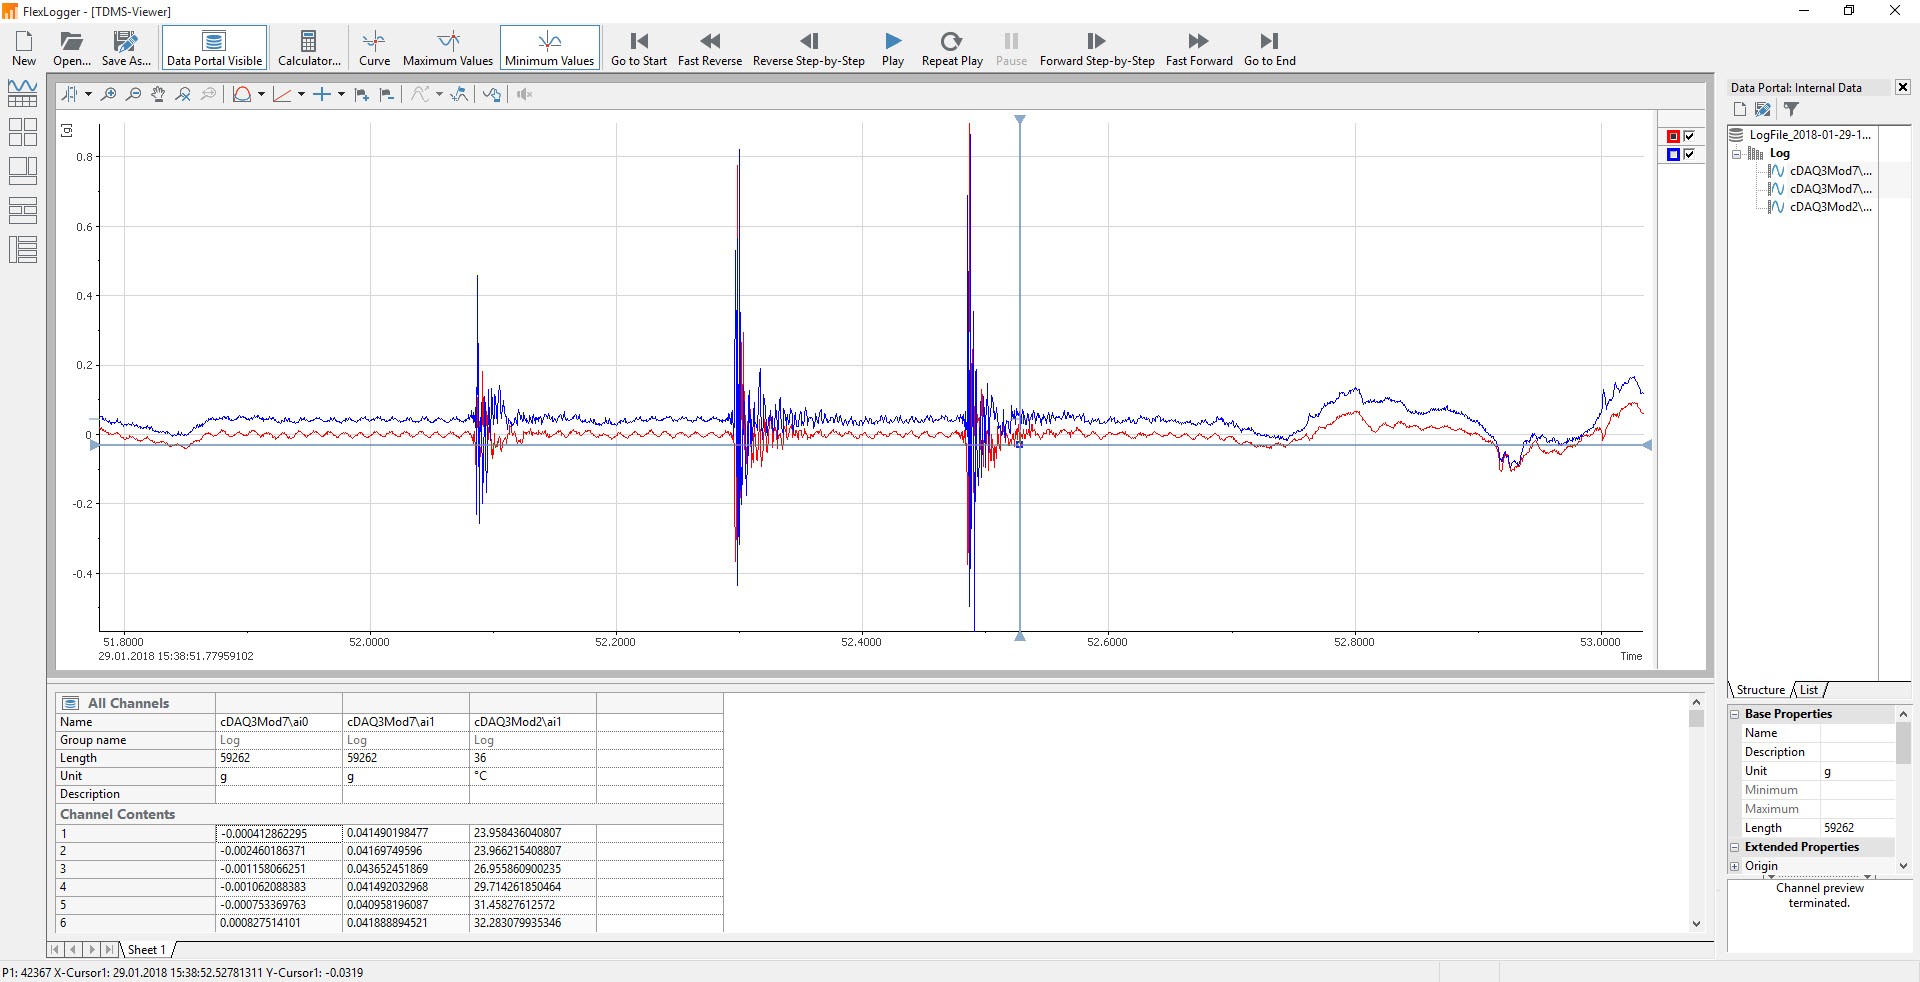 Drag Channels over from the Data Portal to the 2D Graph to see multiple waveforms in one graph